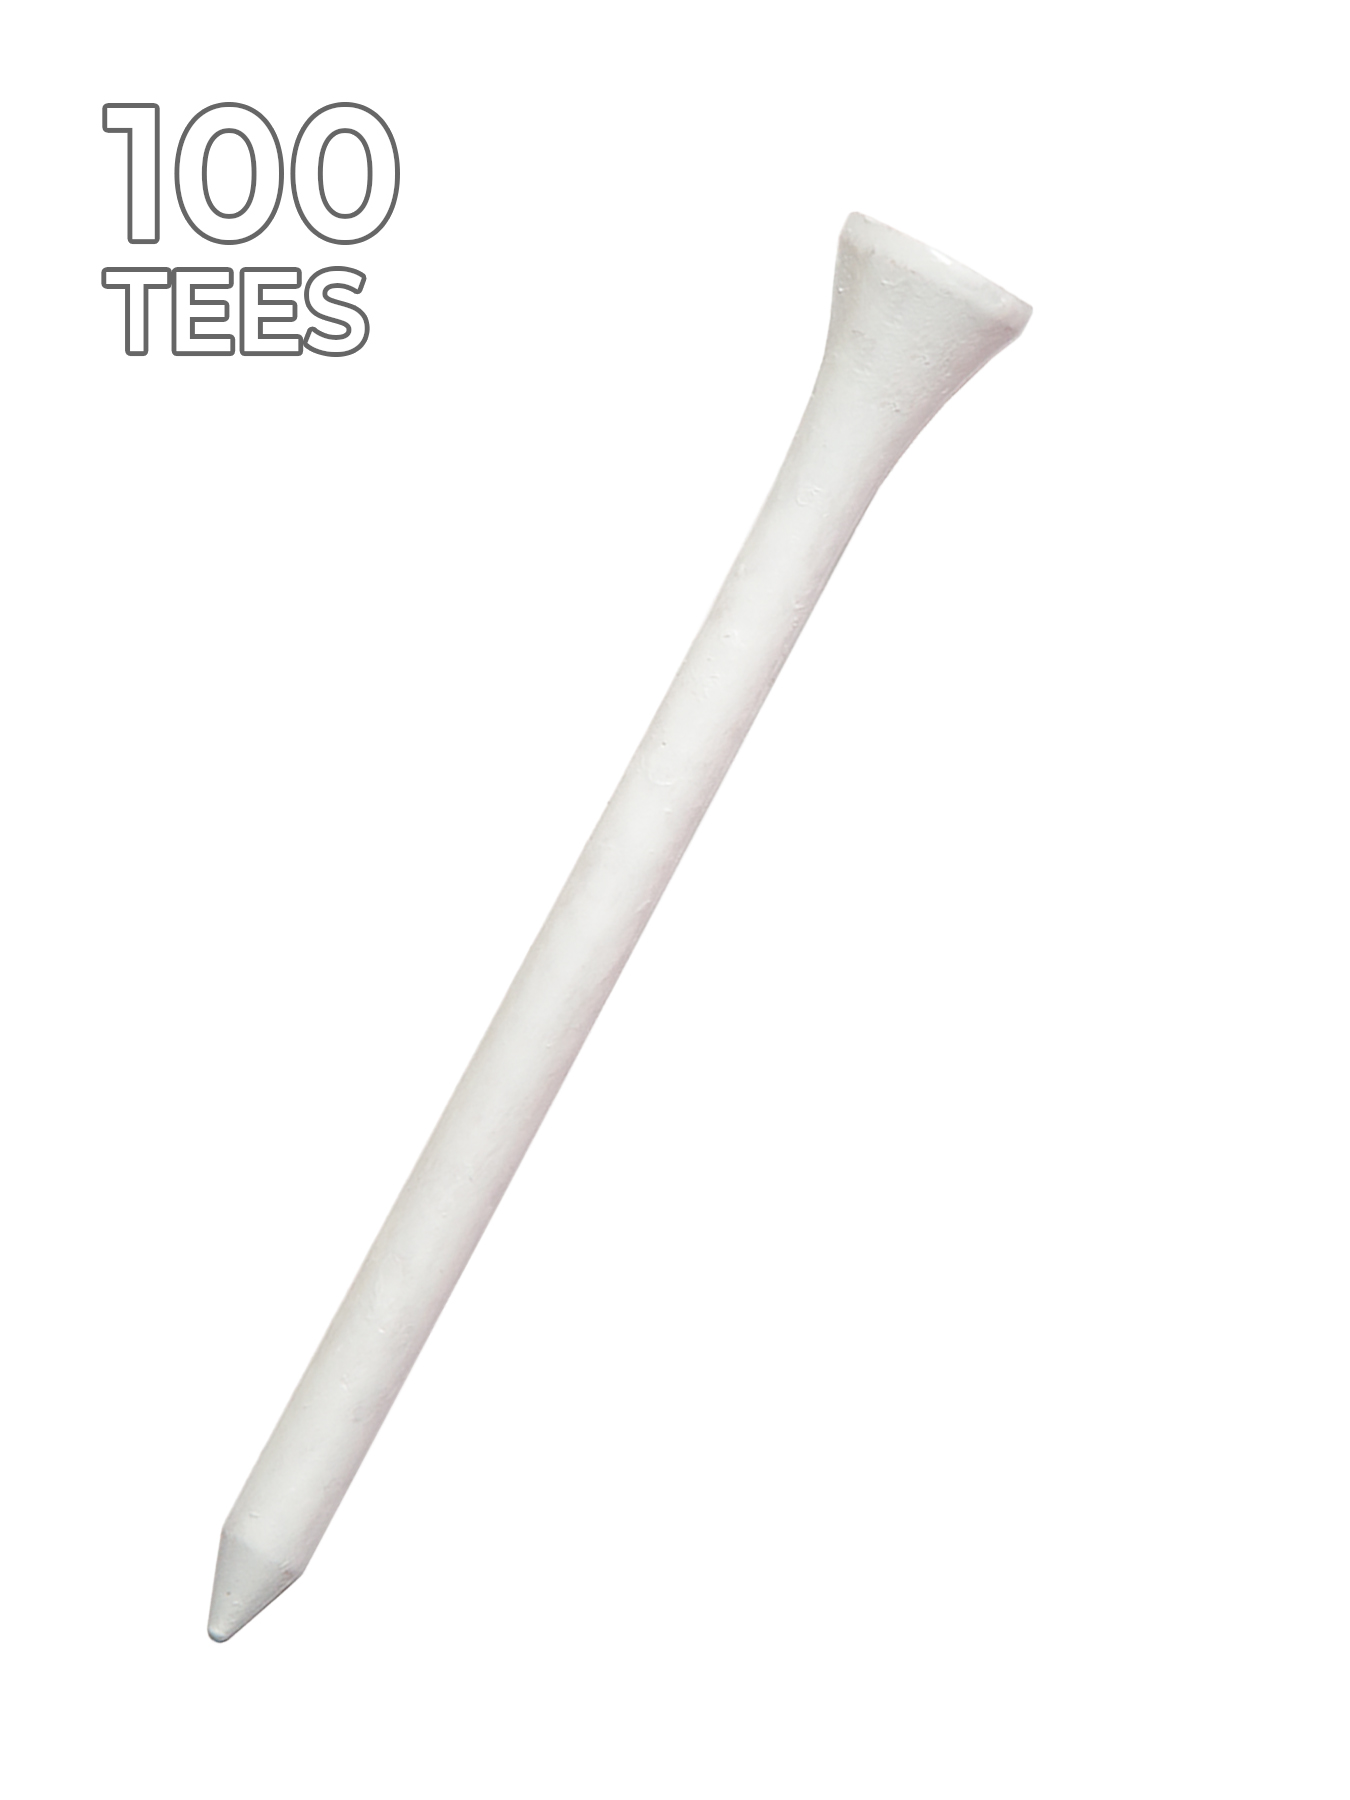 Pride Golf Tee, 2.75 inch, White, 100 Count - image 1 of 4